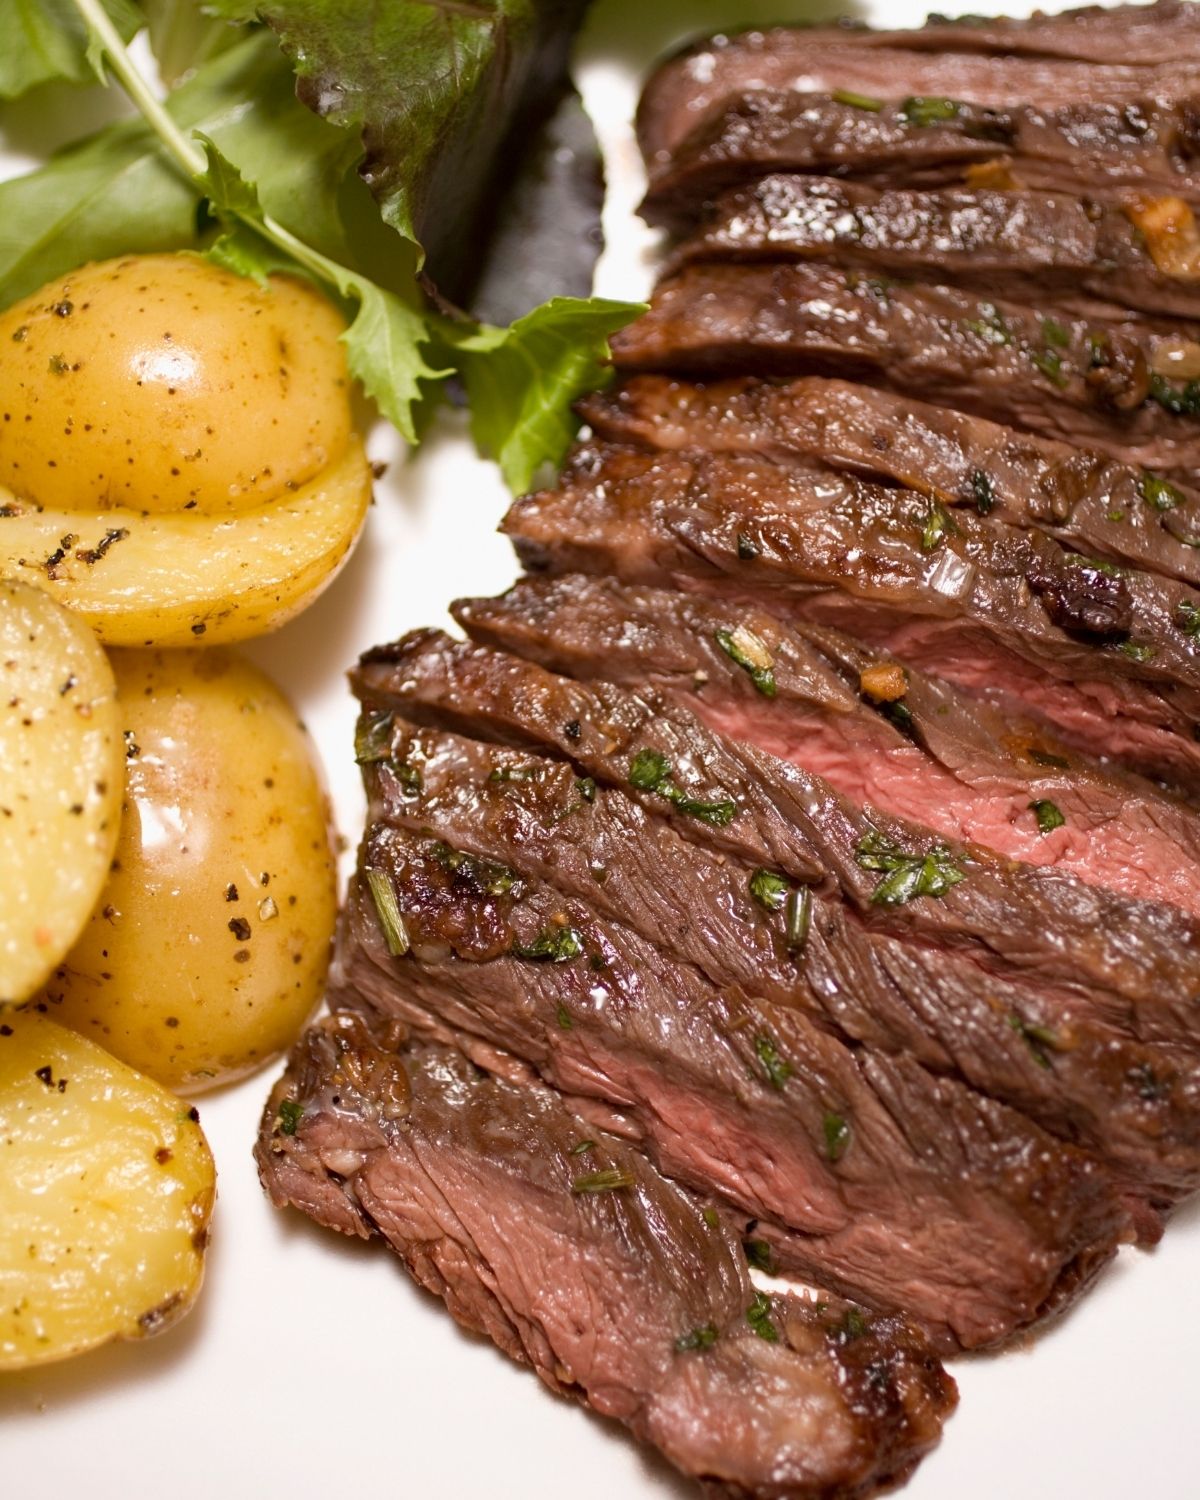 Skirt steak with side of potatoes.